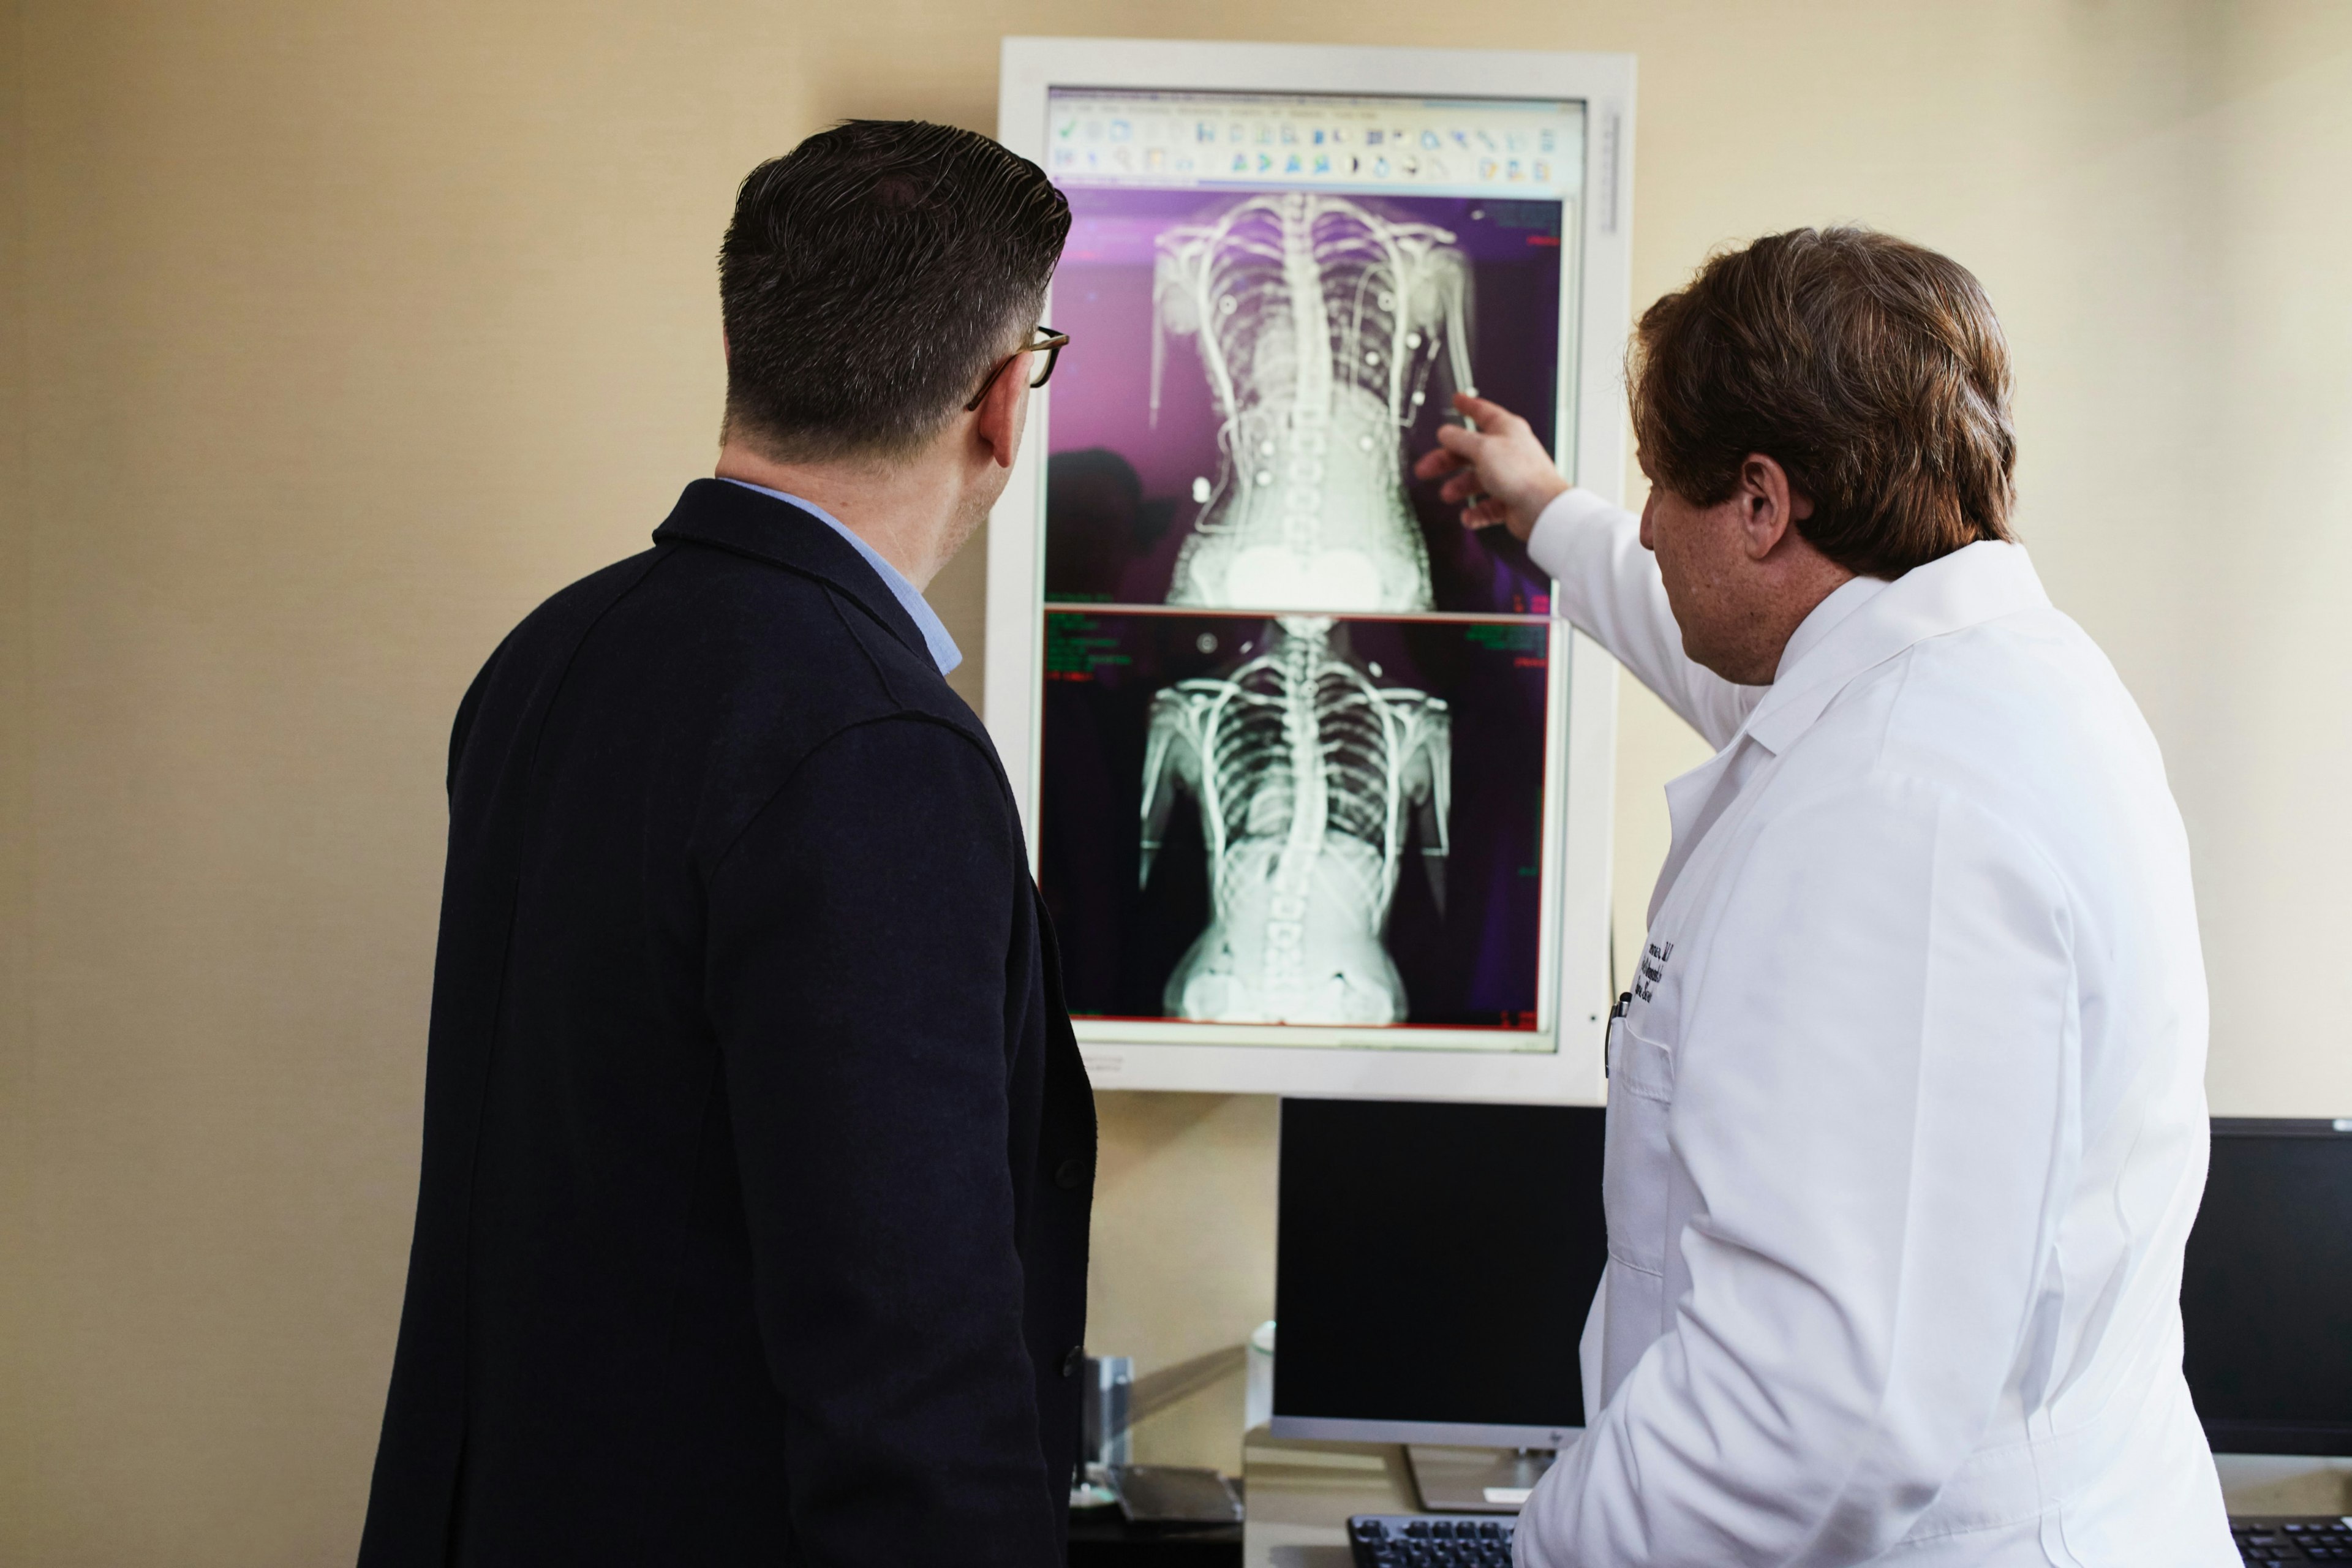 A doctor explains X-ray results to a patient.